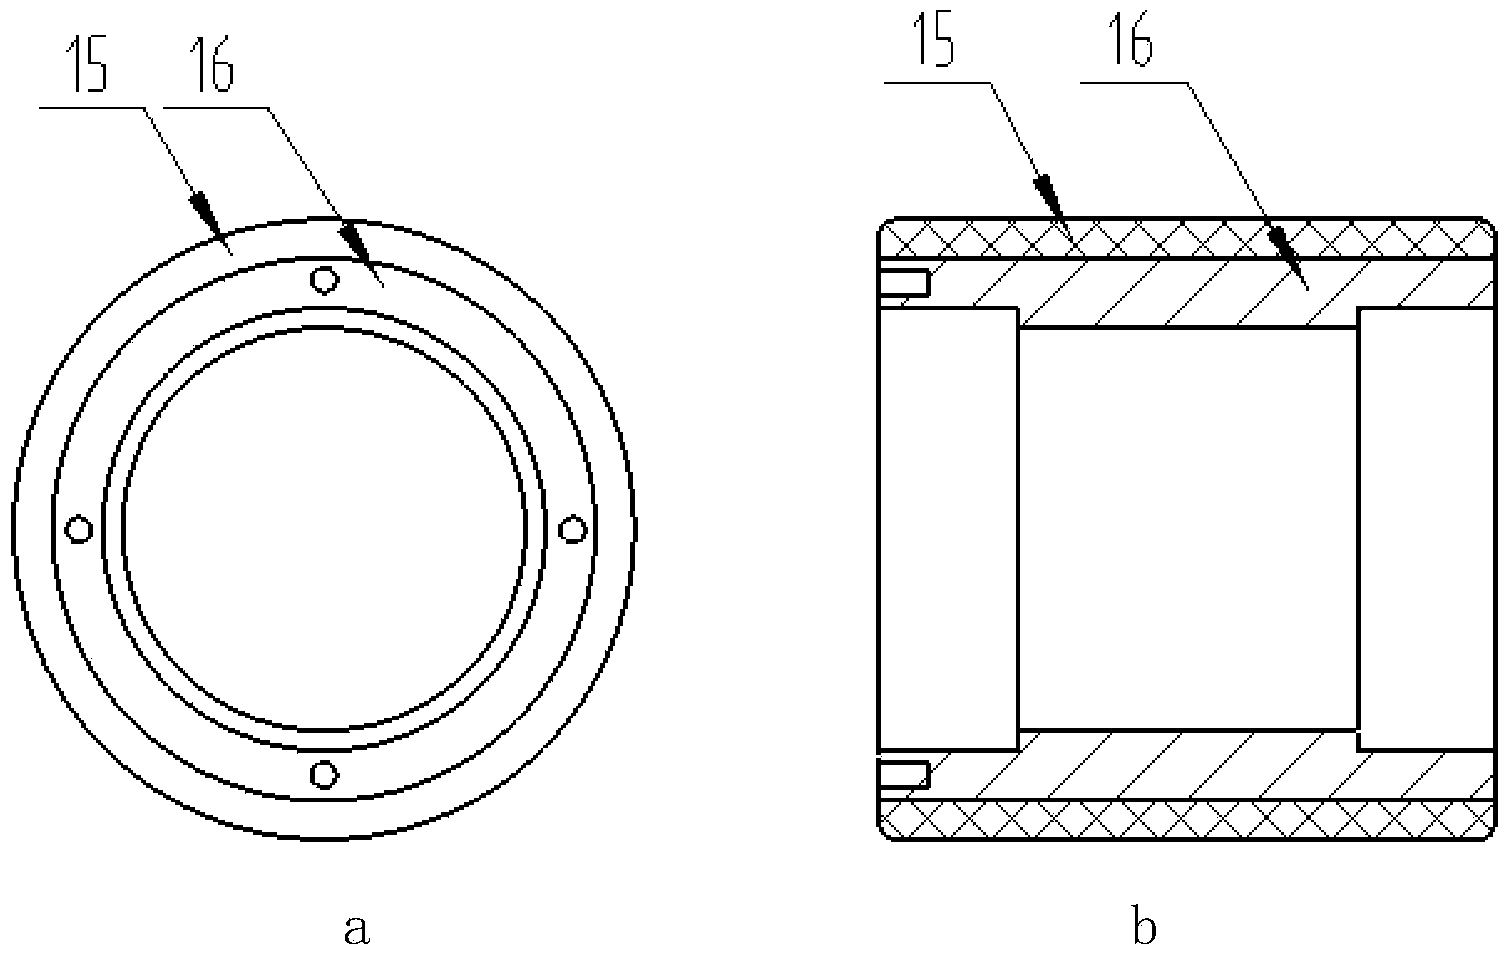 Drive unit for rotating outer ring and fixing inner ring of airplane wheel bearing